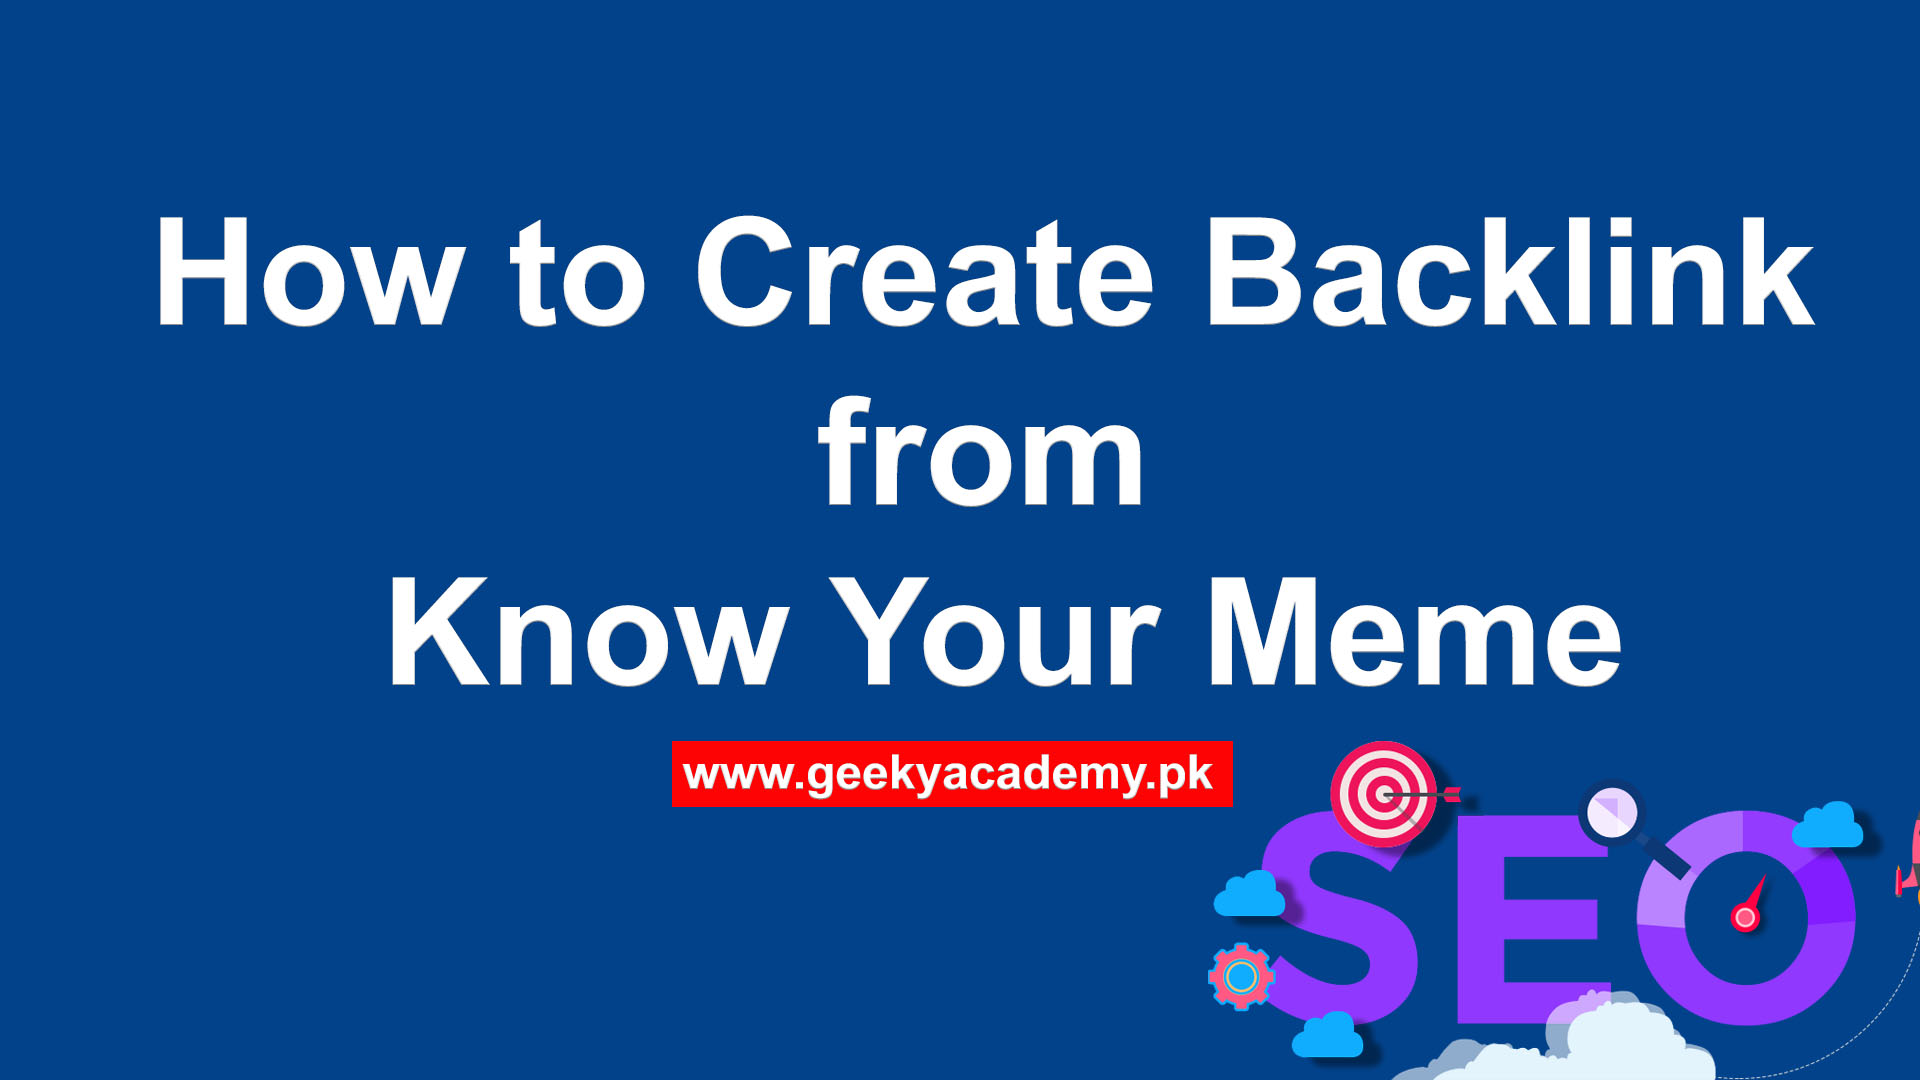 How to Create Backlink from Know Your Meme